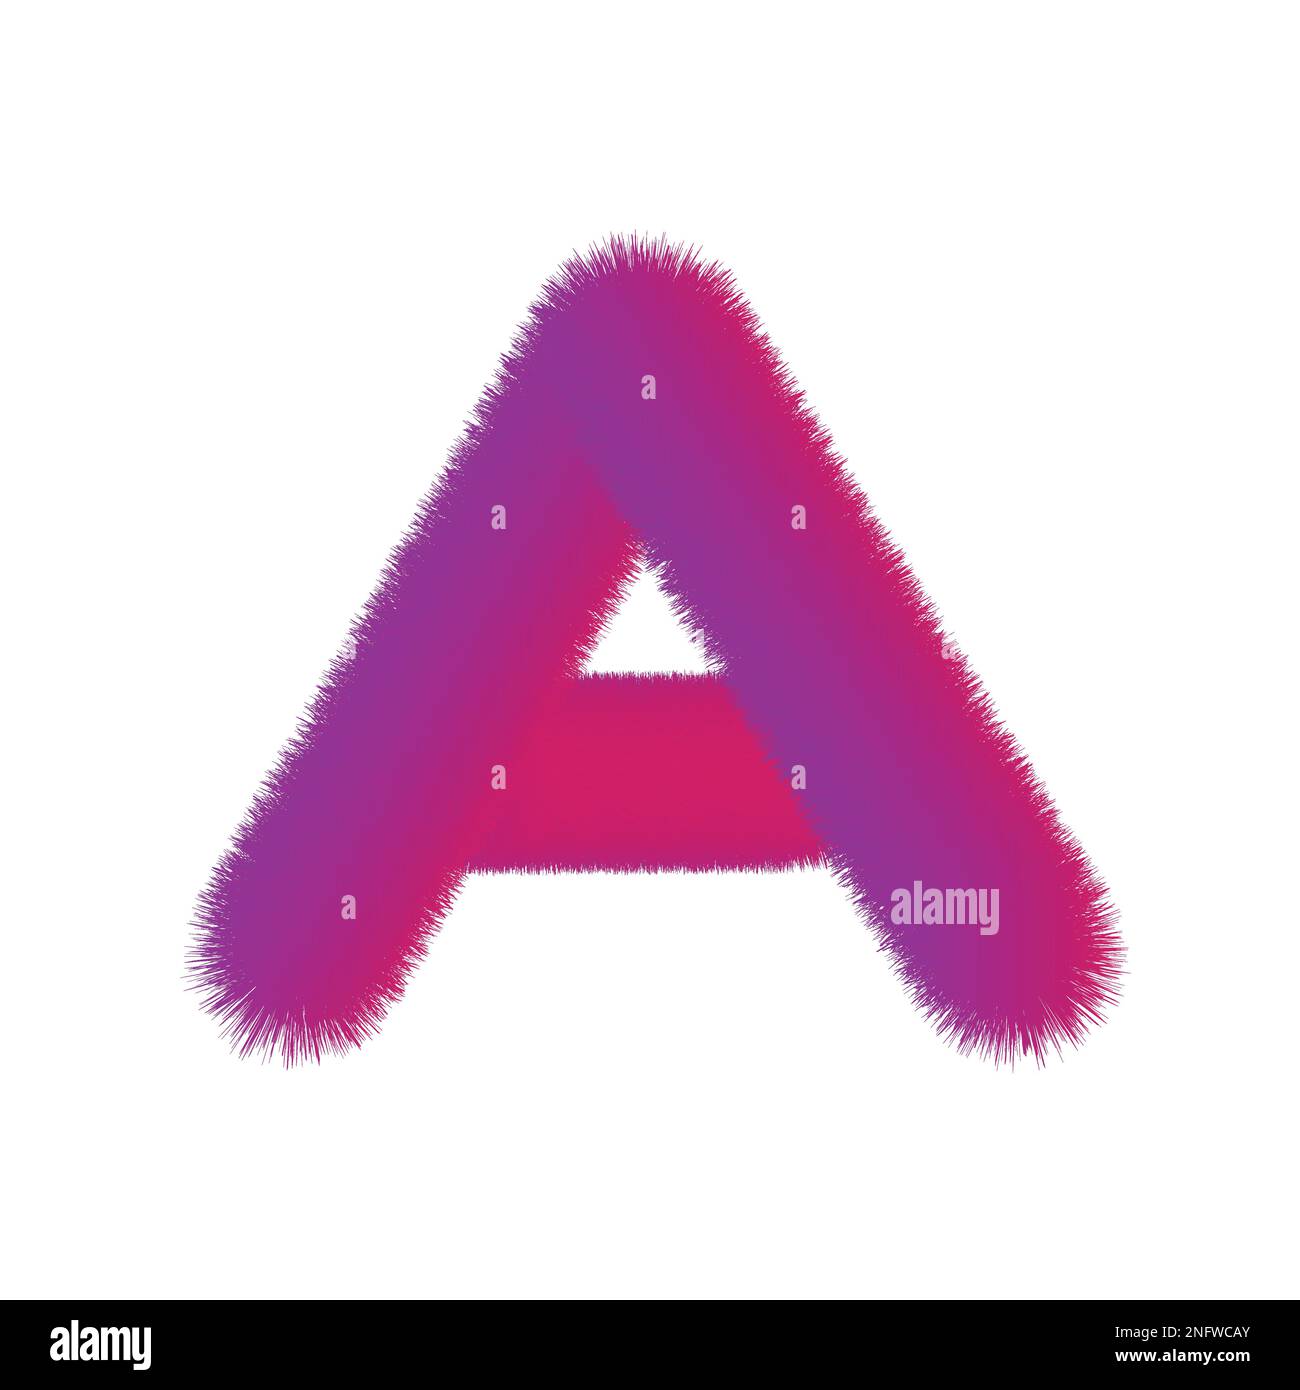 High Quality 3D Shaggy Letter A on White Background . Isolated Vector Element Stock Vector